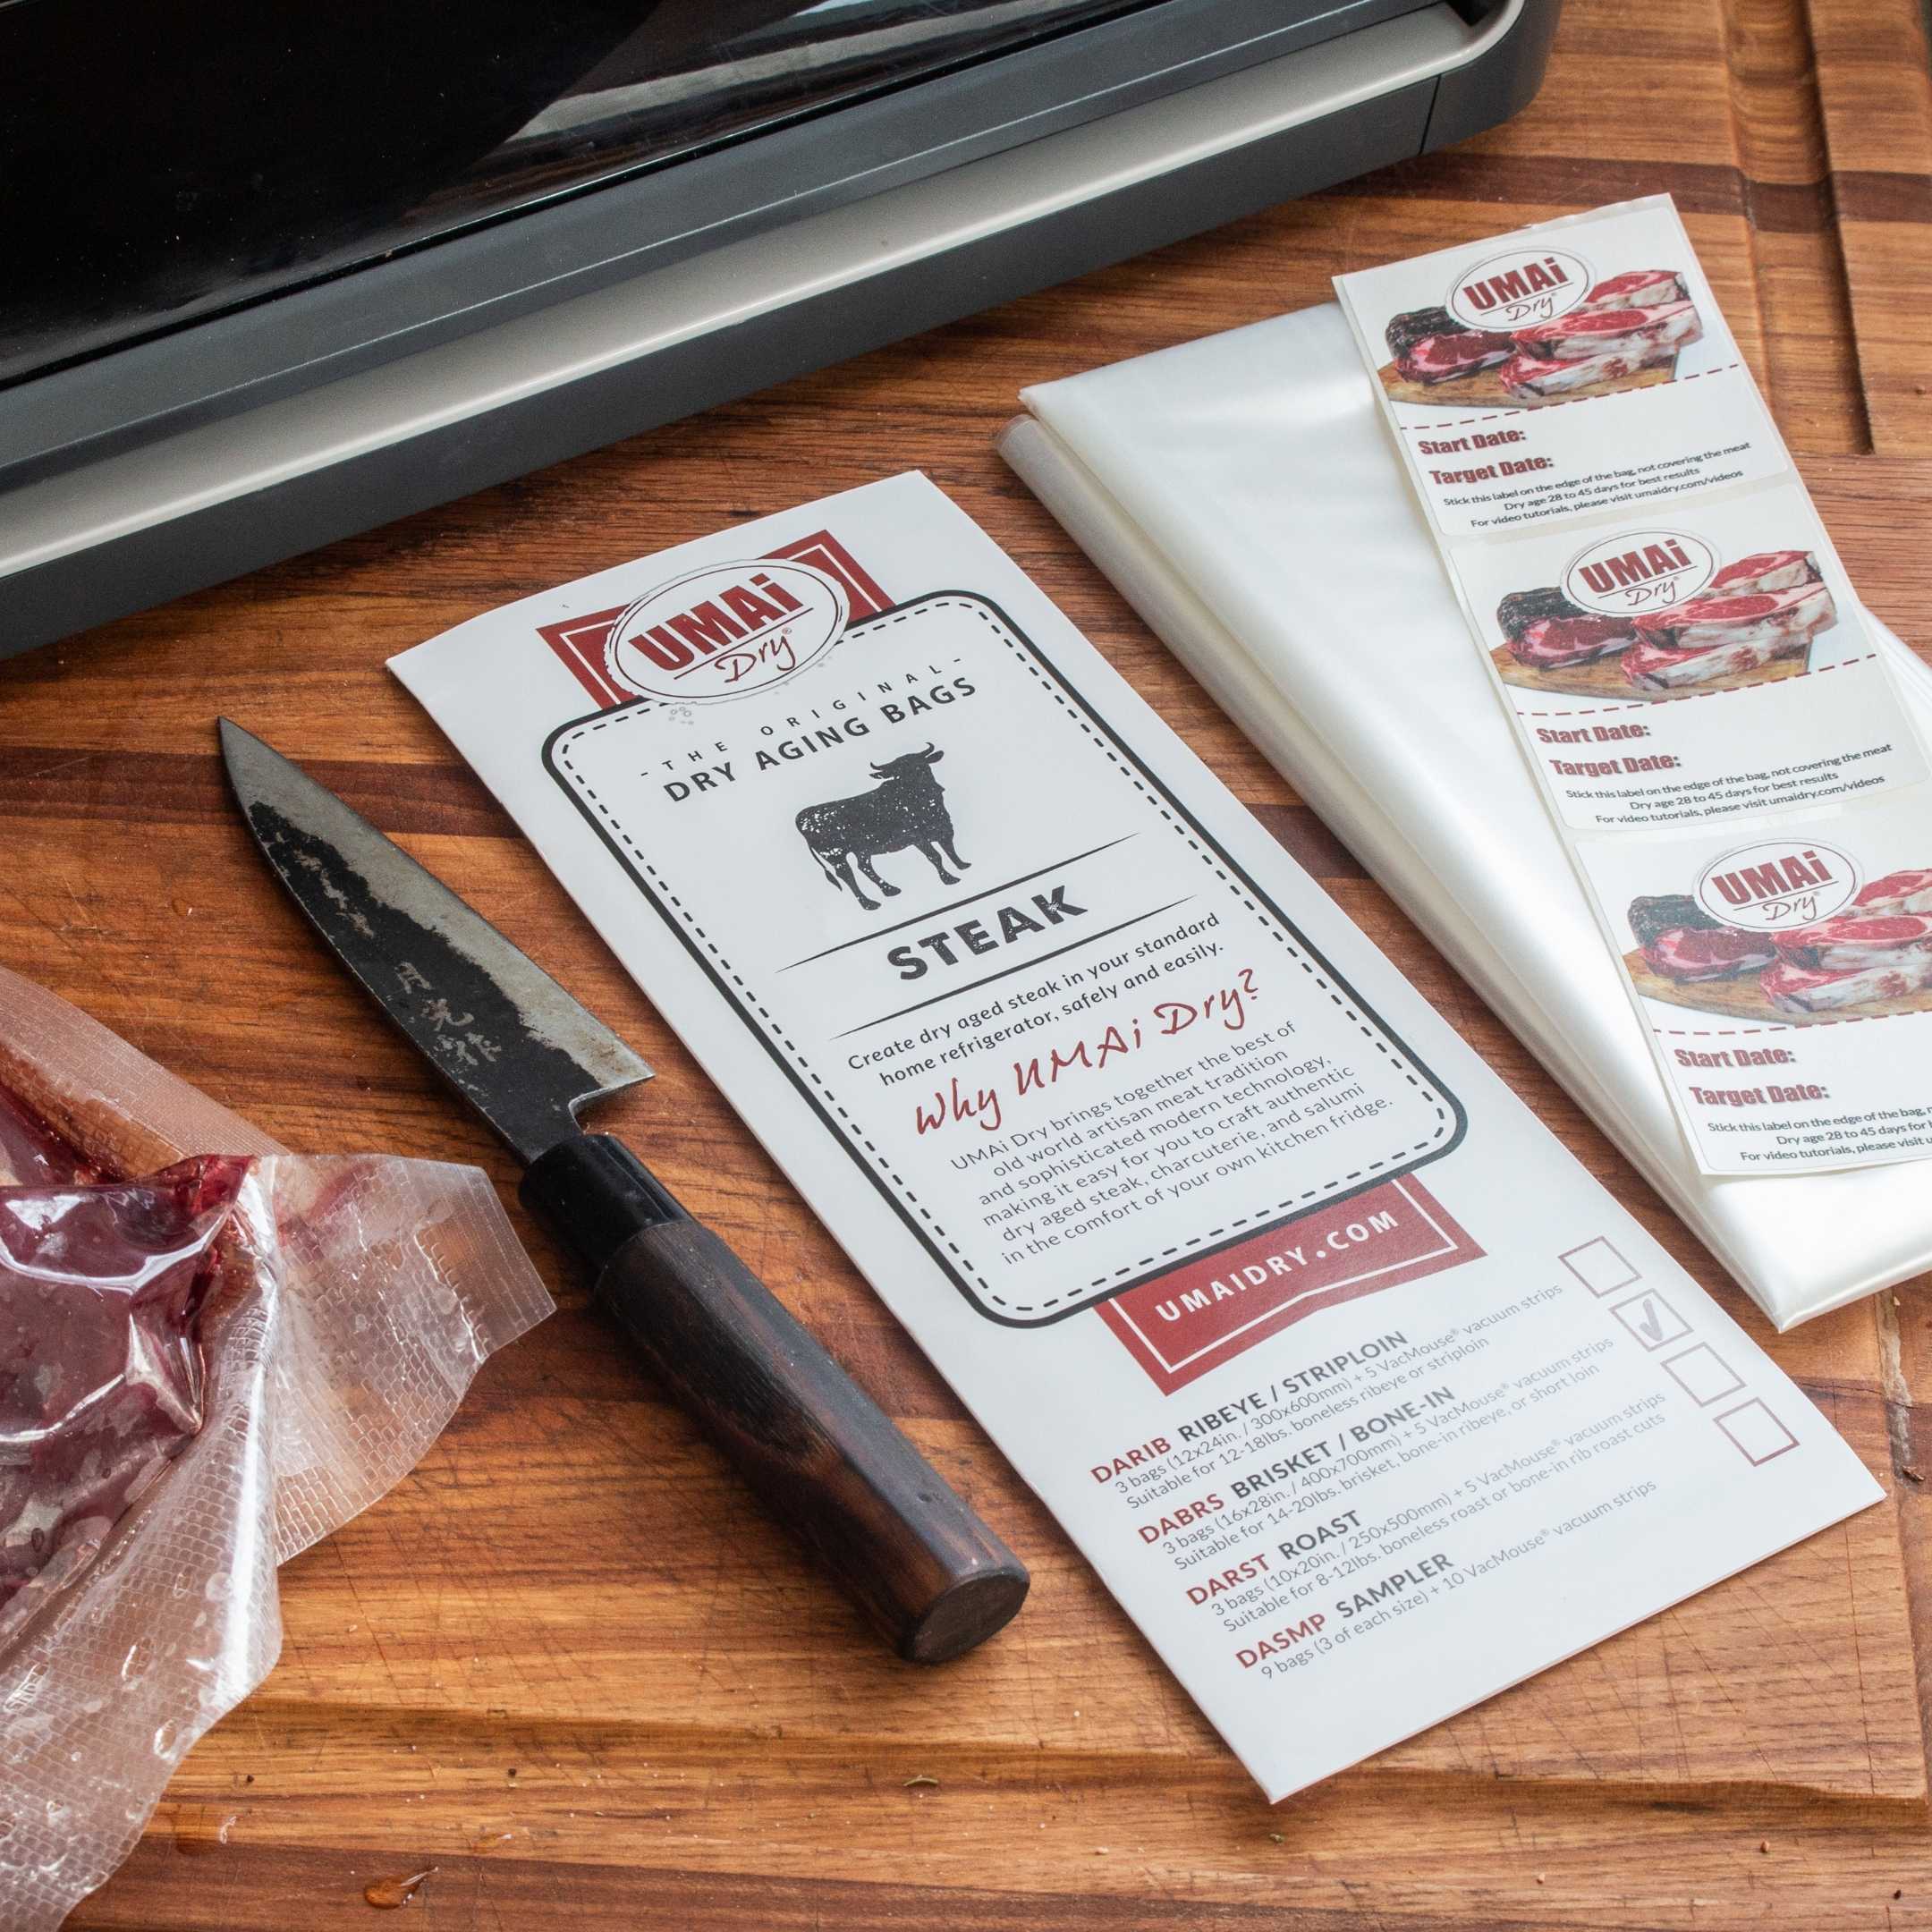 These Knives That Cut the Toughest Steaks 'with Ease' in Our Tests